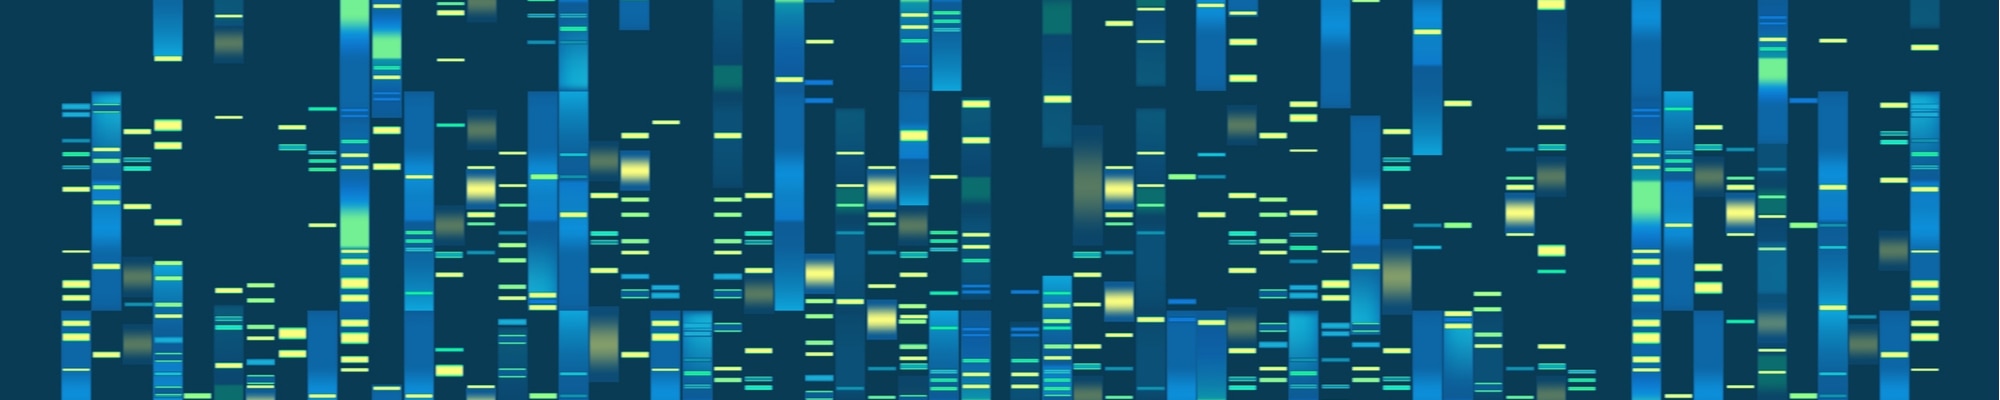 image representing sequencing